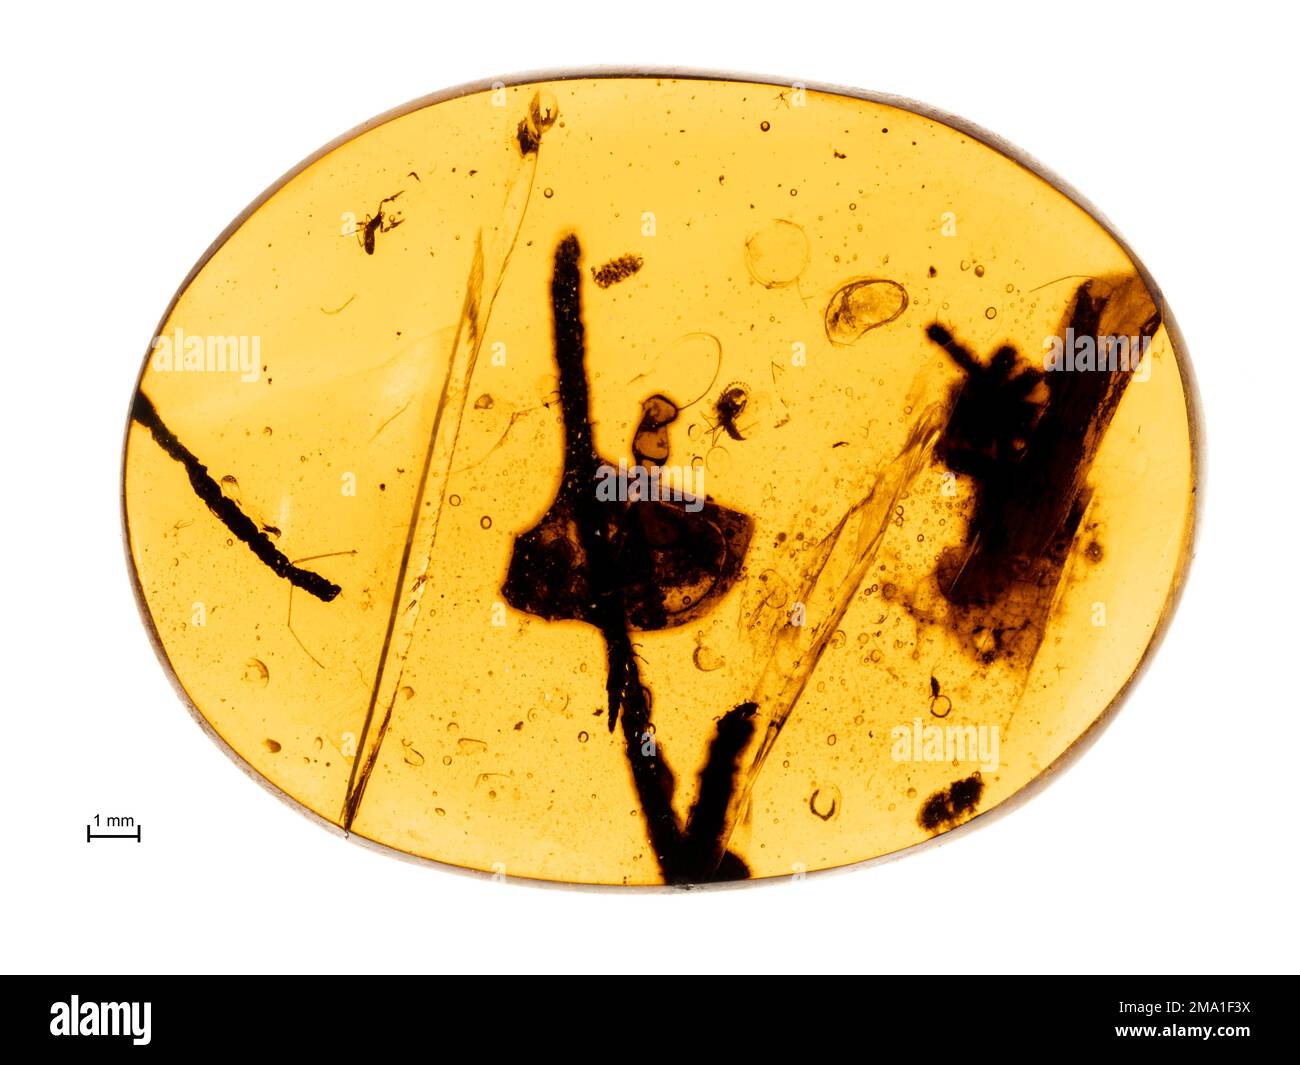 Piece of 99 million year old Burmese amber (burmite) with plant debris and a tiny pseudoscorpion preserved inside Stock Photo